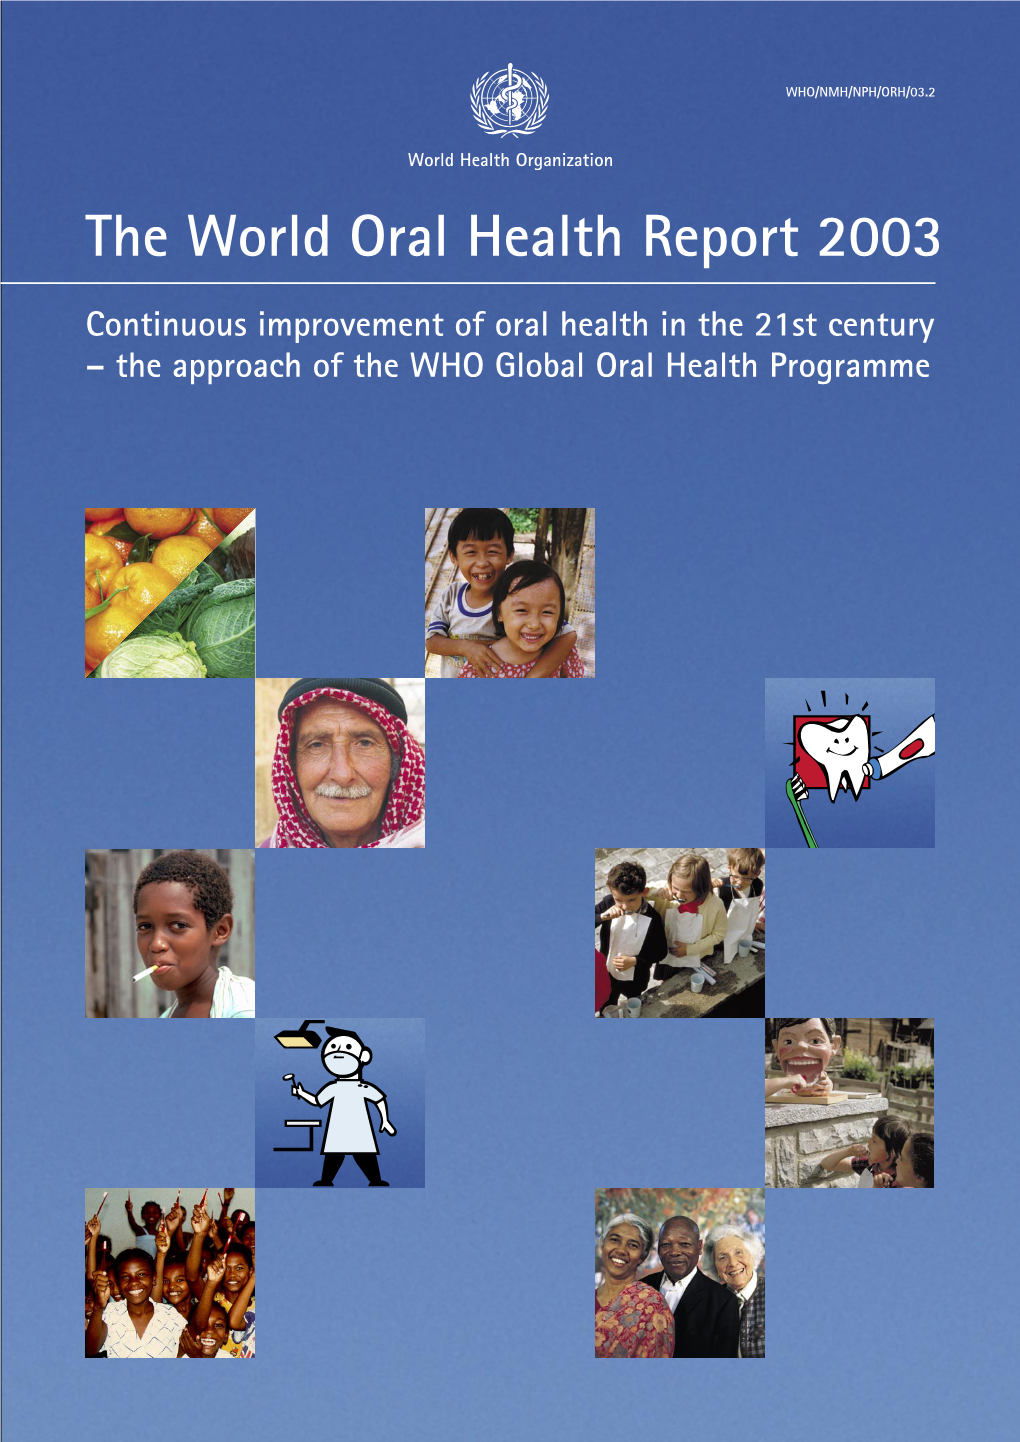 The World Oral Health Report 2003